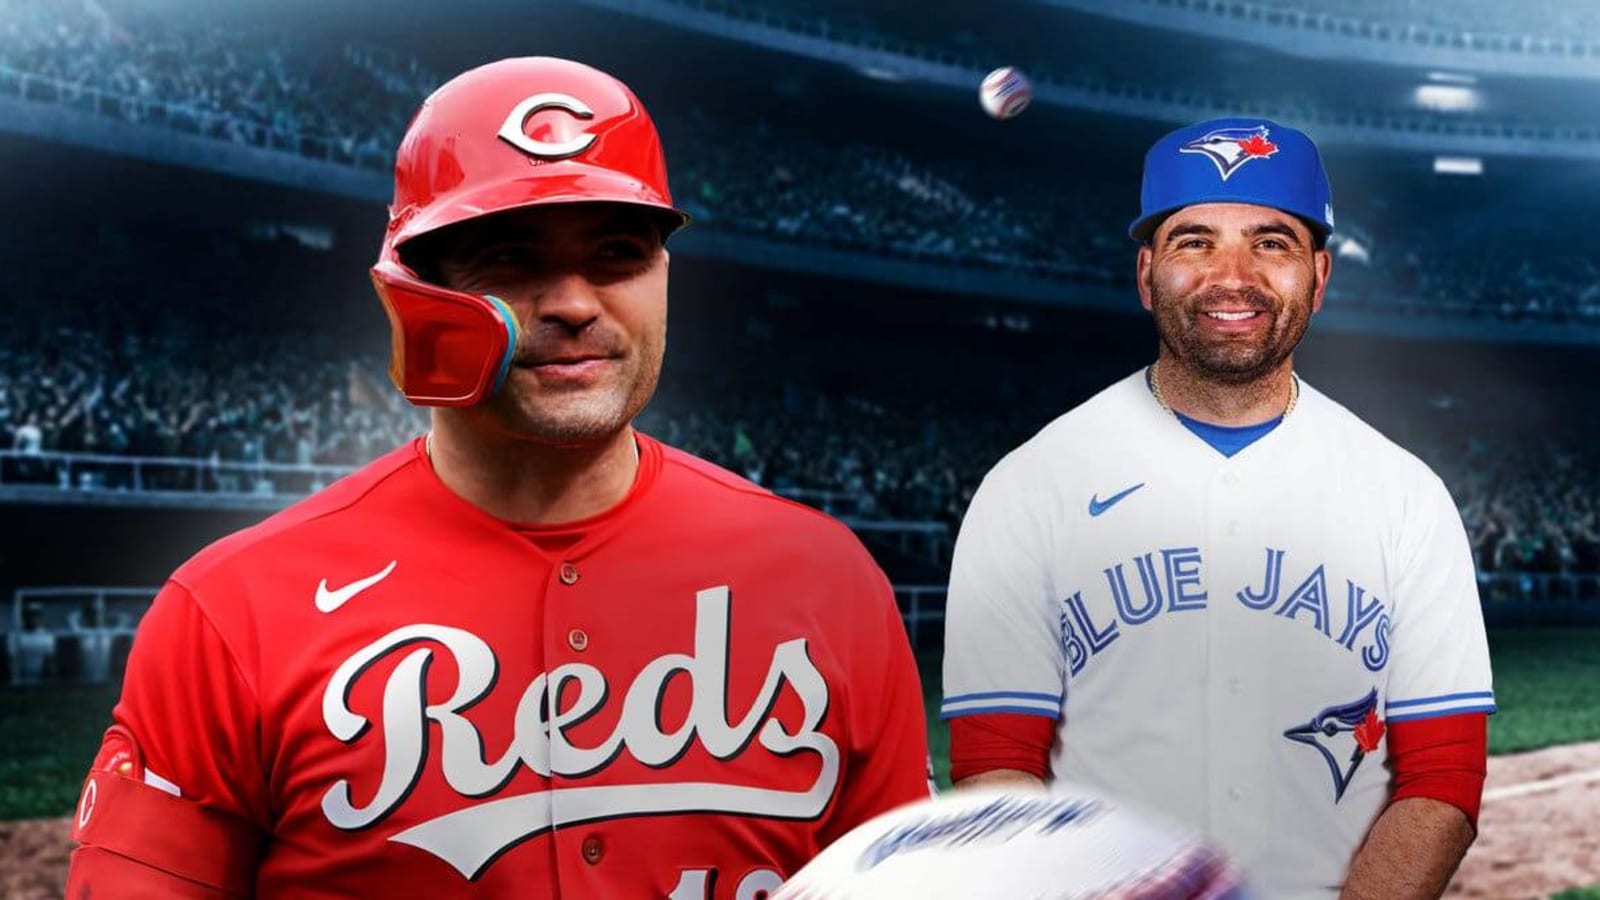 Reds: Joey Votto gets classy Cincinnati message after signing with Blue Jays